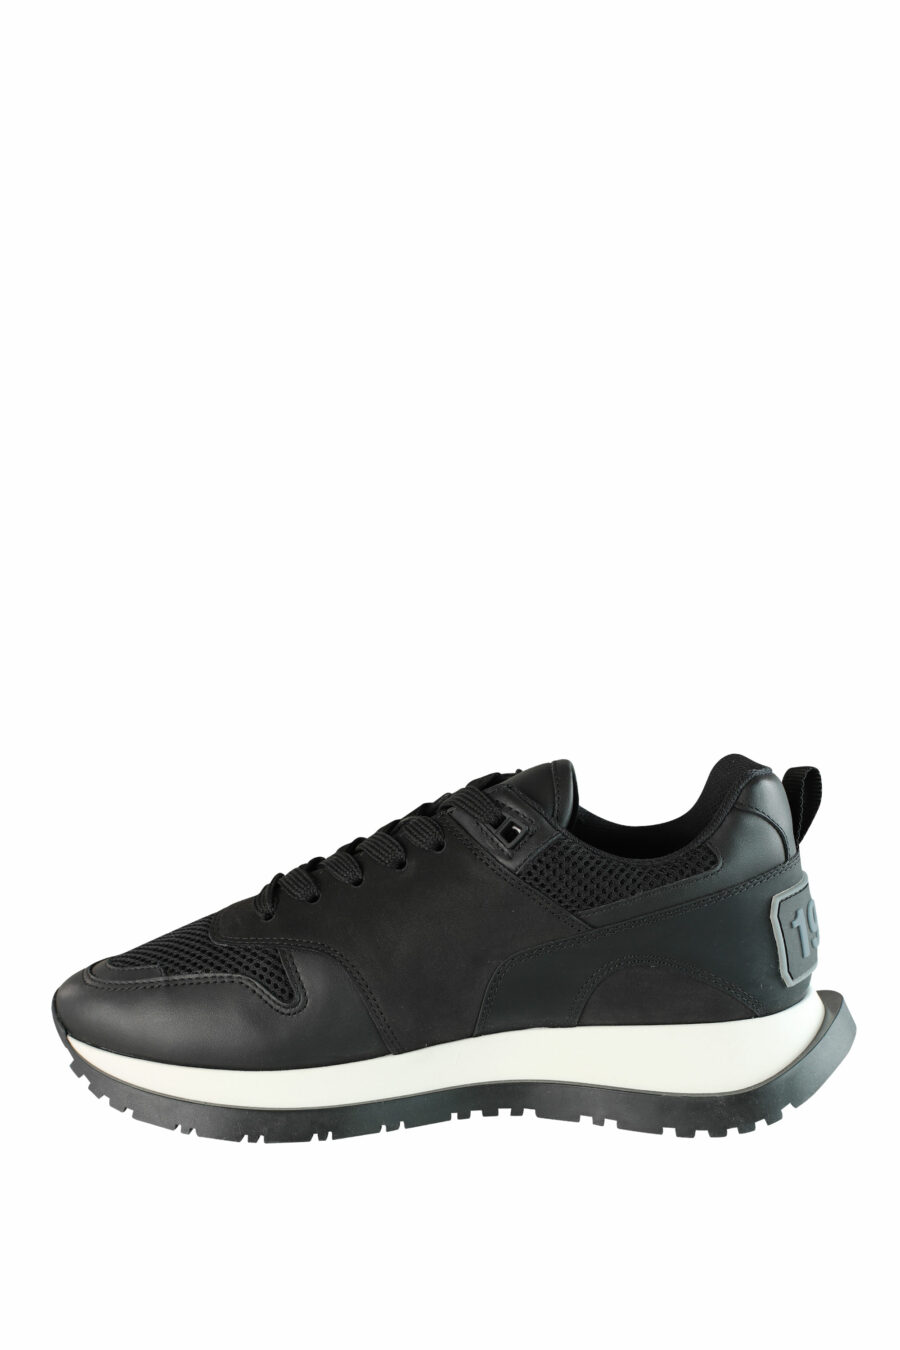 Black running shoes with white sole and black logo - IMG 1432